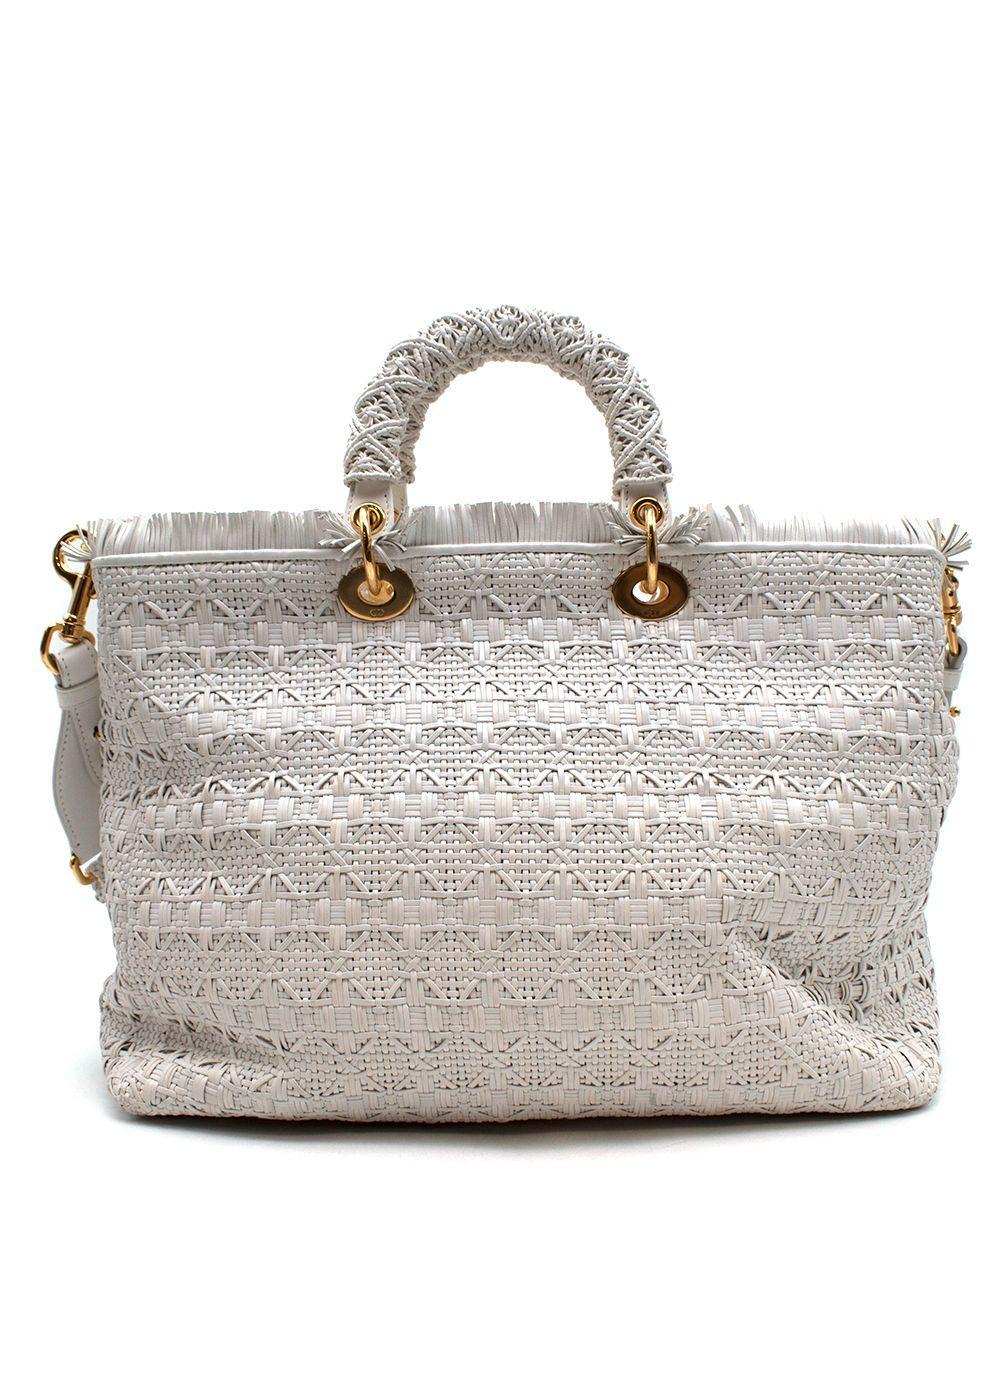 Dior Lady Dior White Woven Leather Bag  4